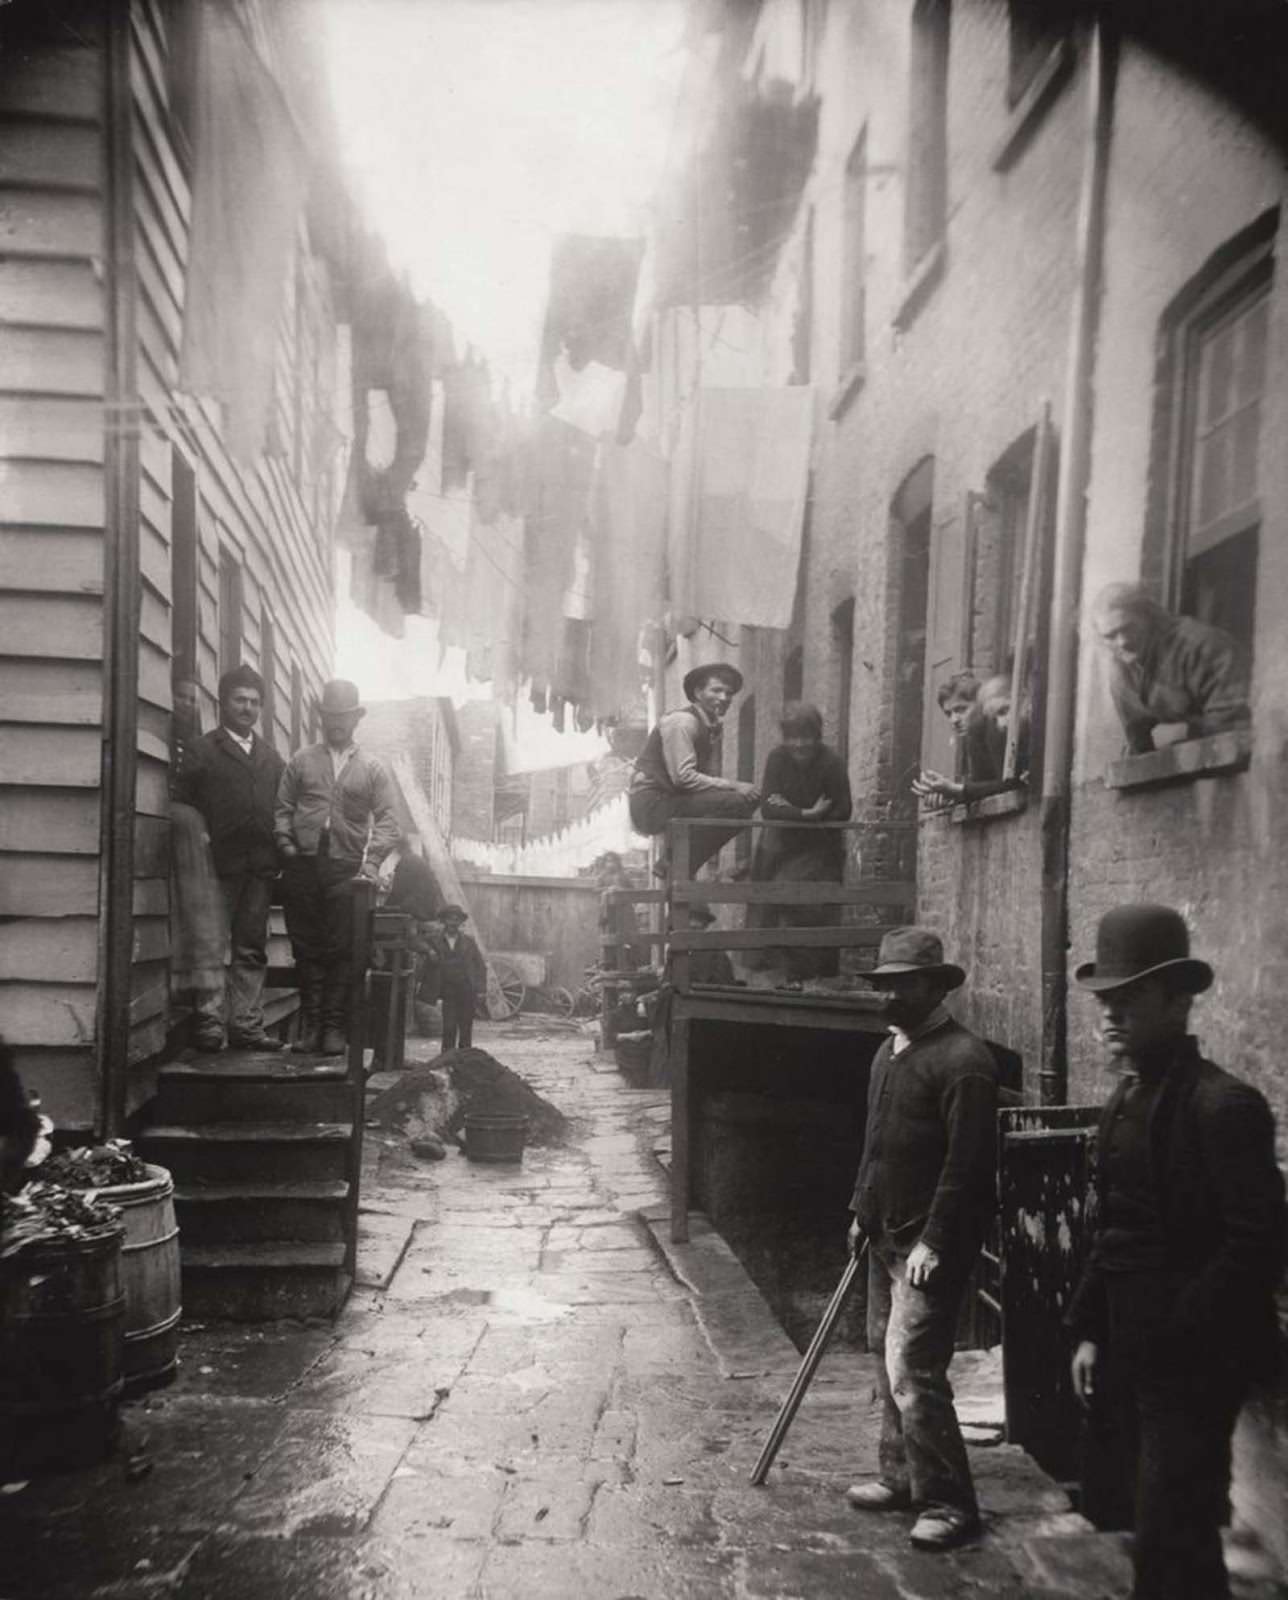 Bandit’s Roost, Mulberry Street, 1888